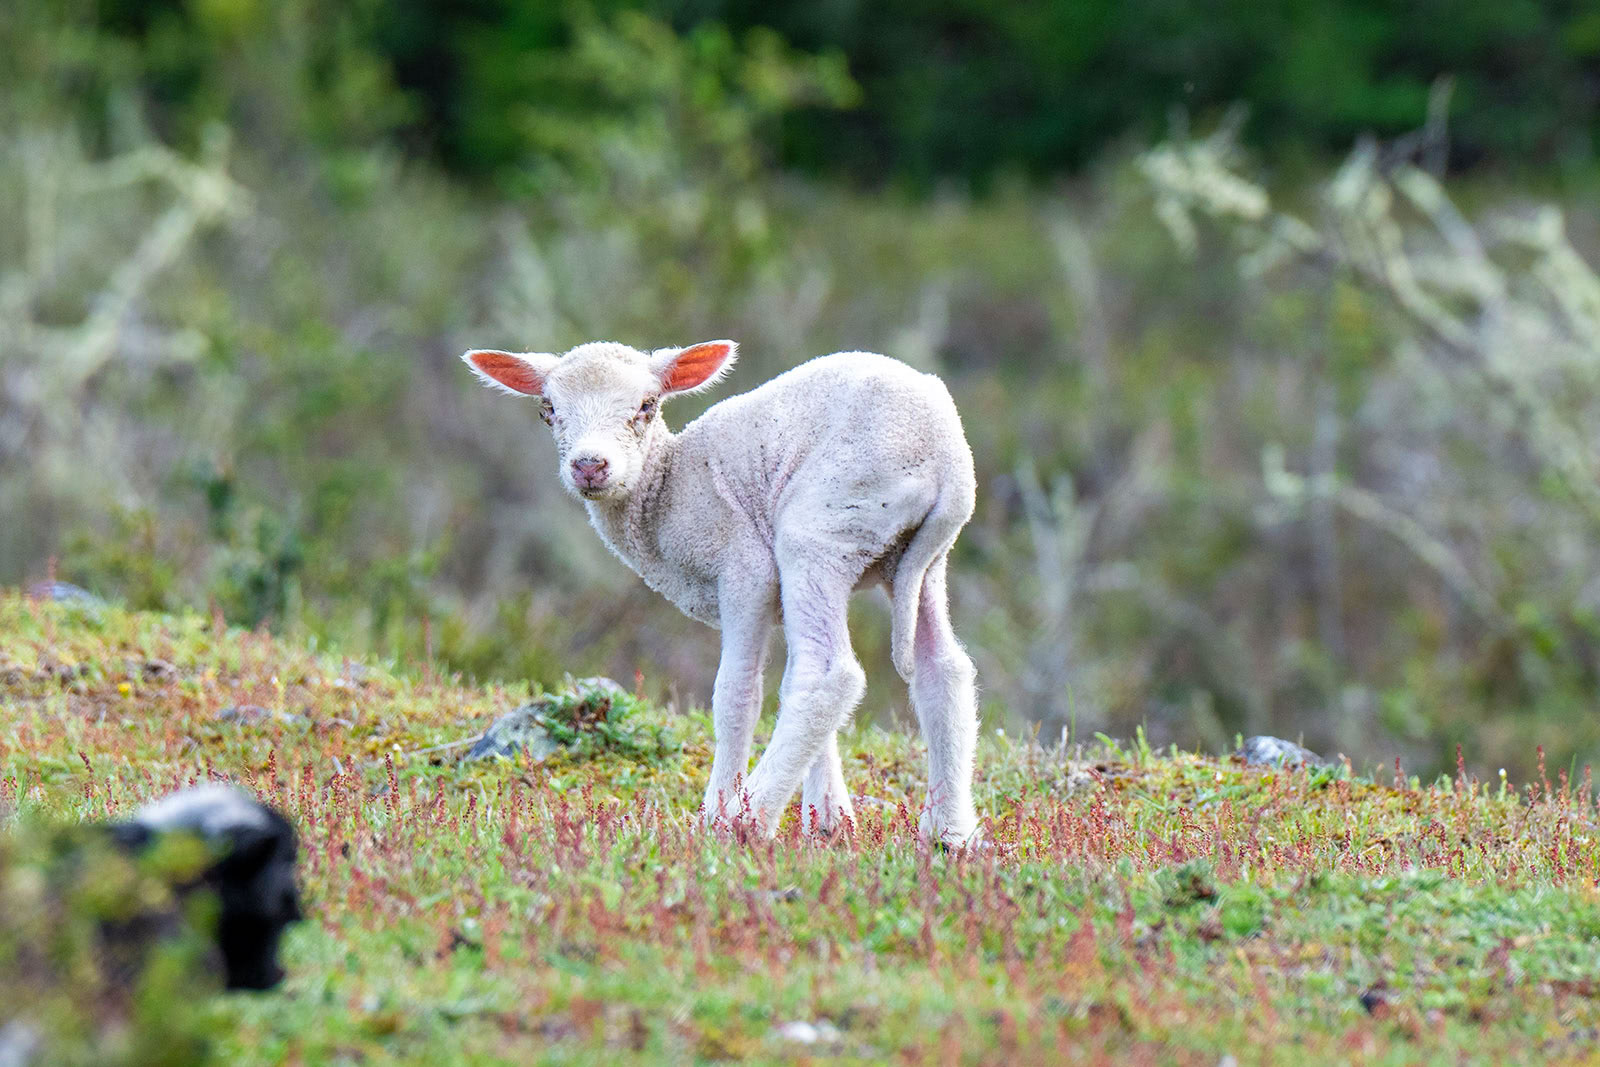 A small, white lamb in the wild from Patagonia, Chile.